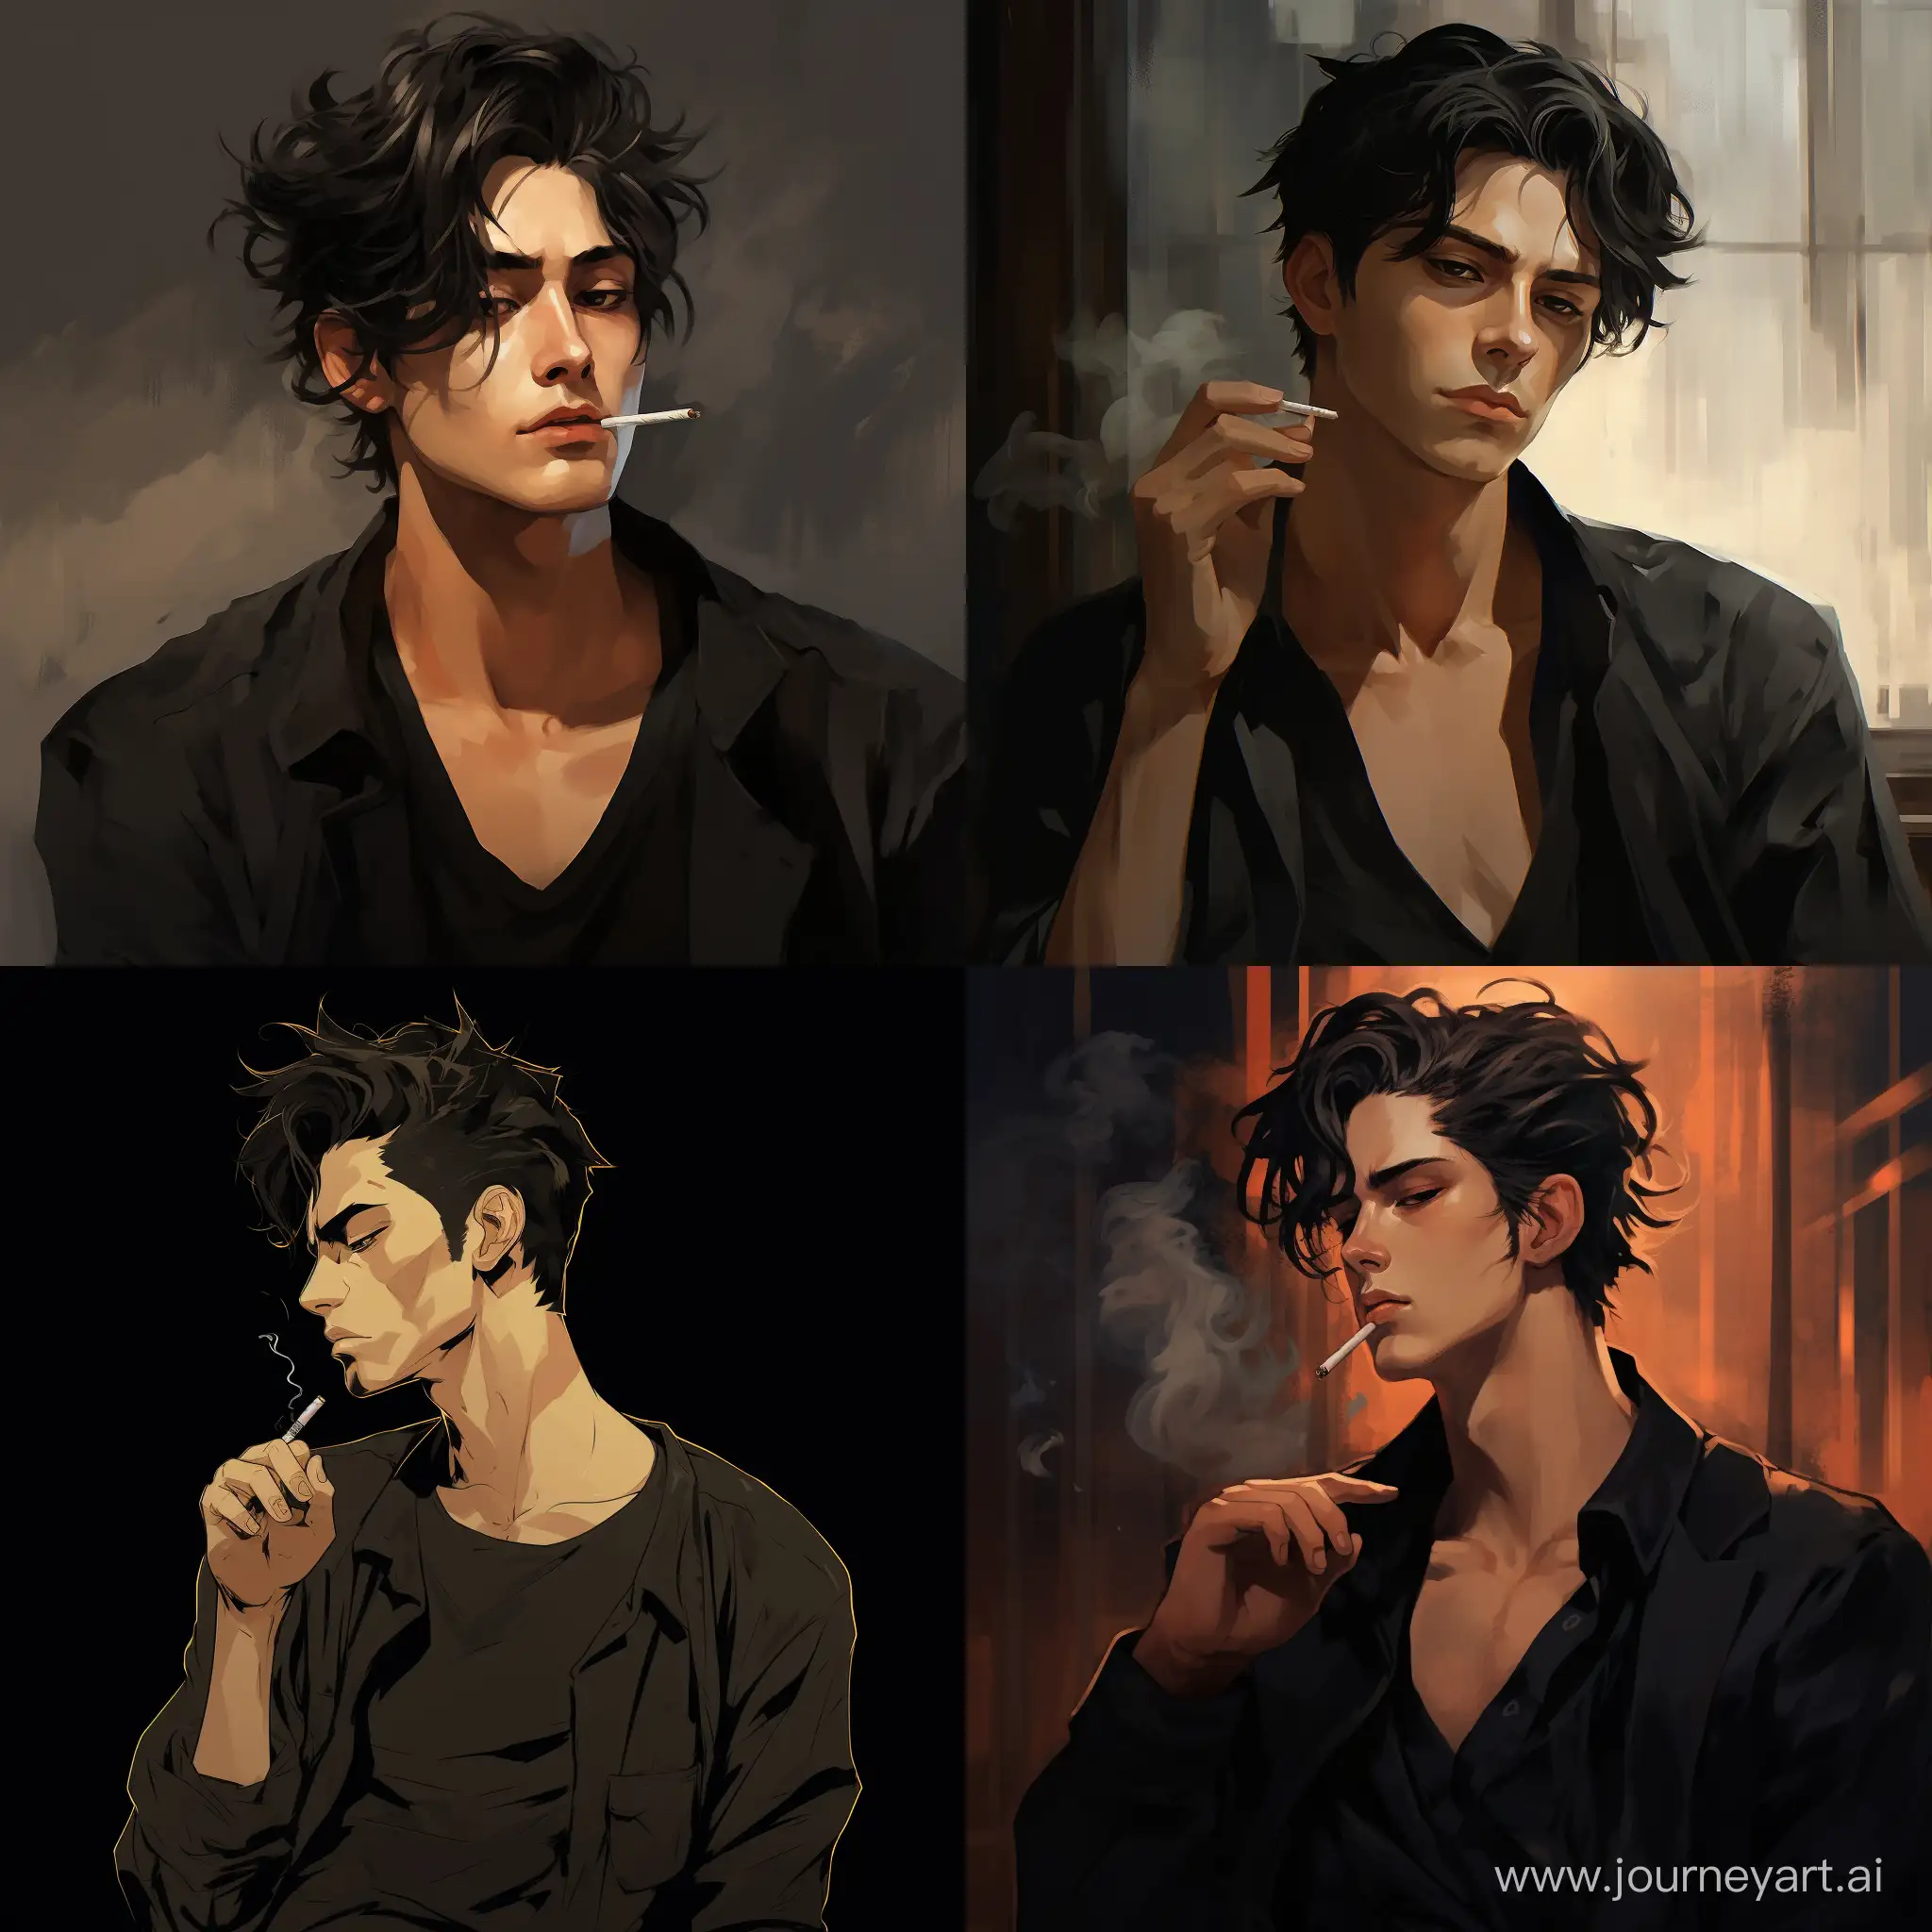 Mysterious-Anime-Man-with-Cigarette-in-Black-Shirt